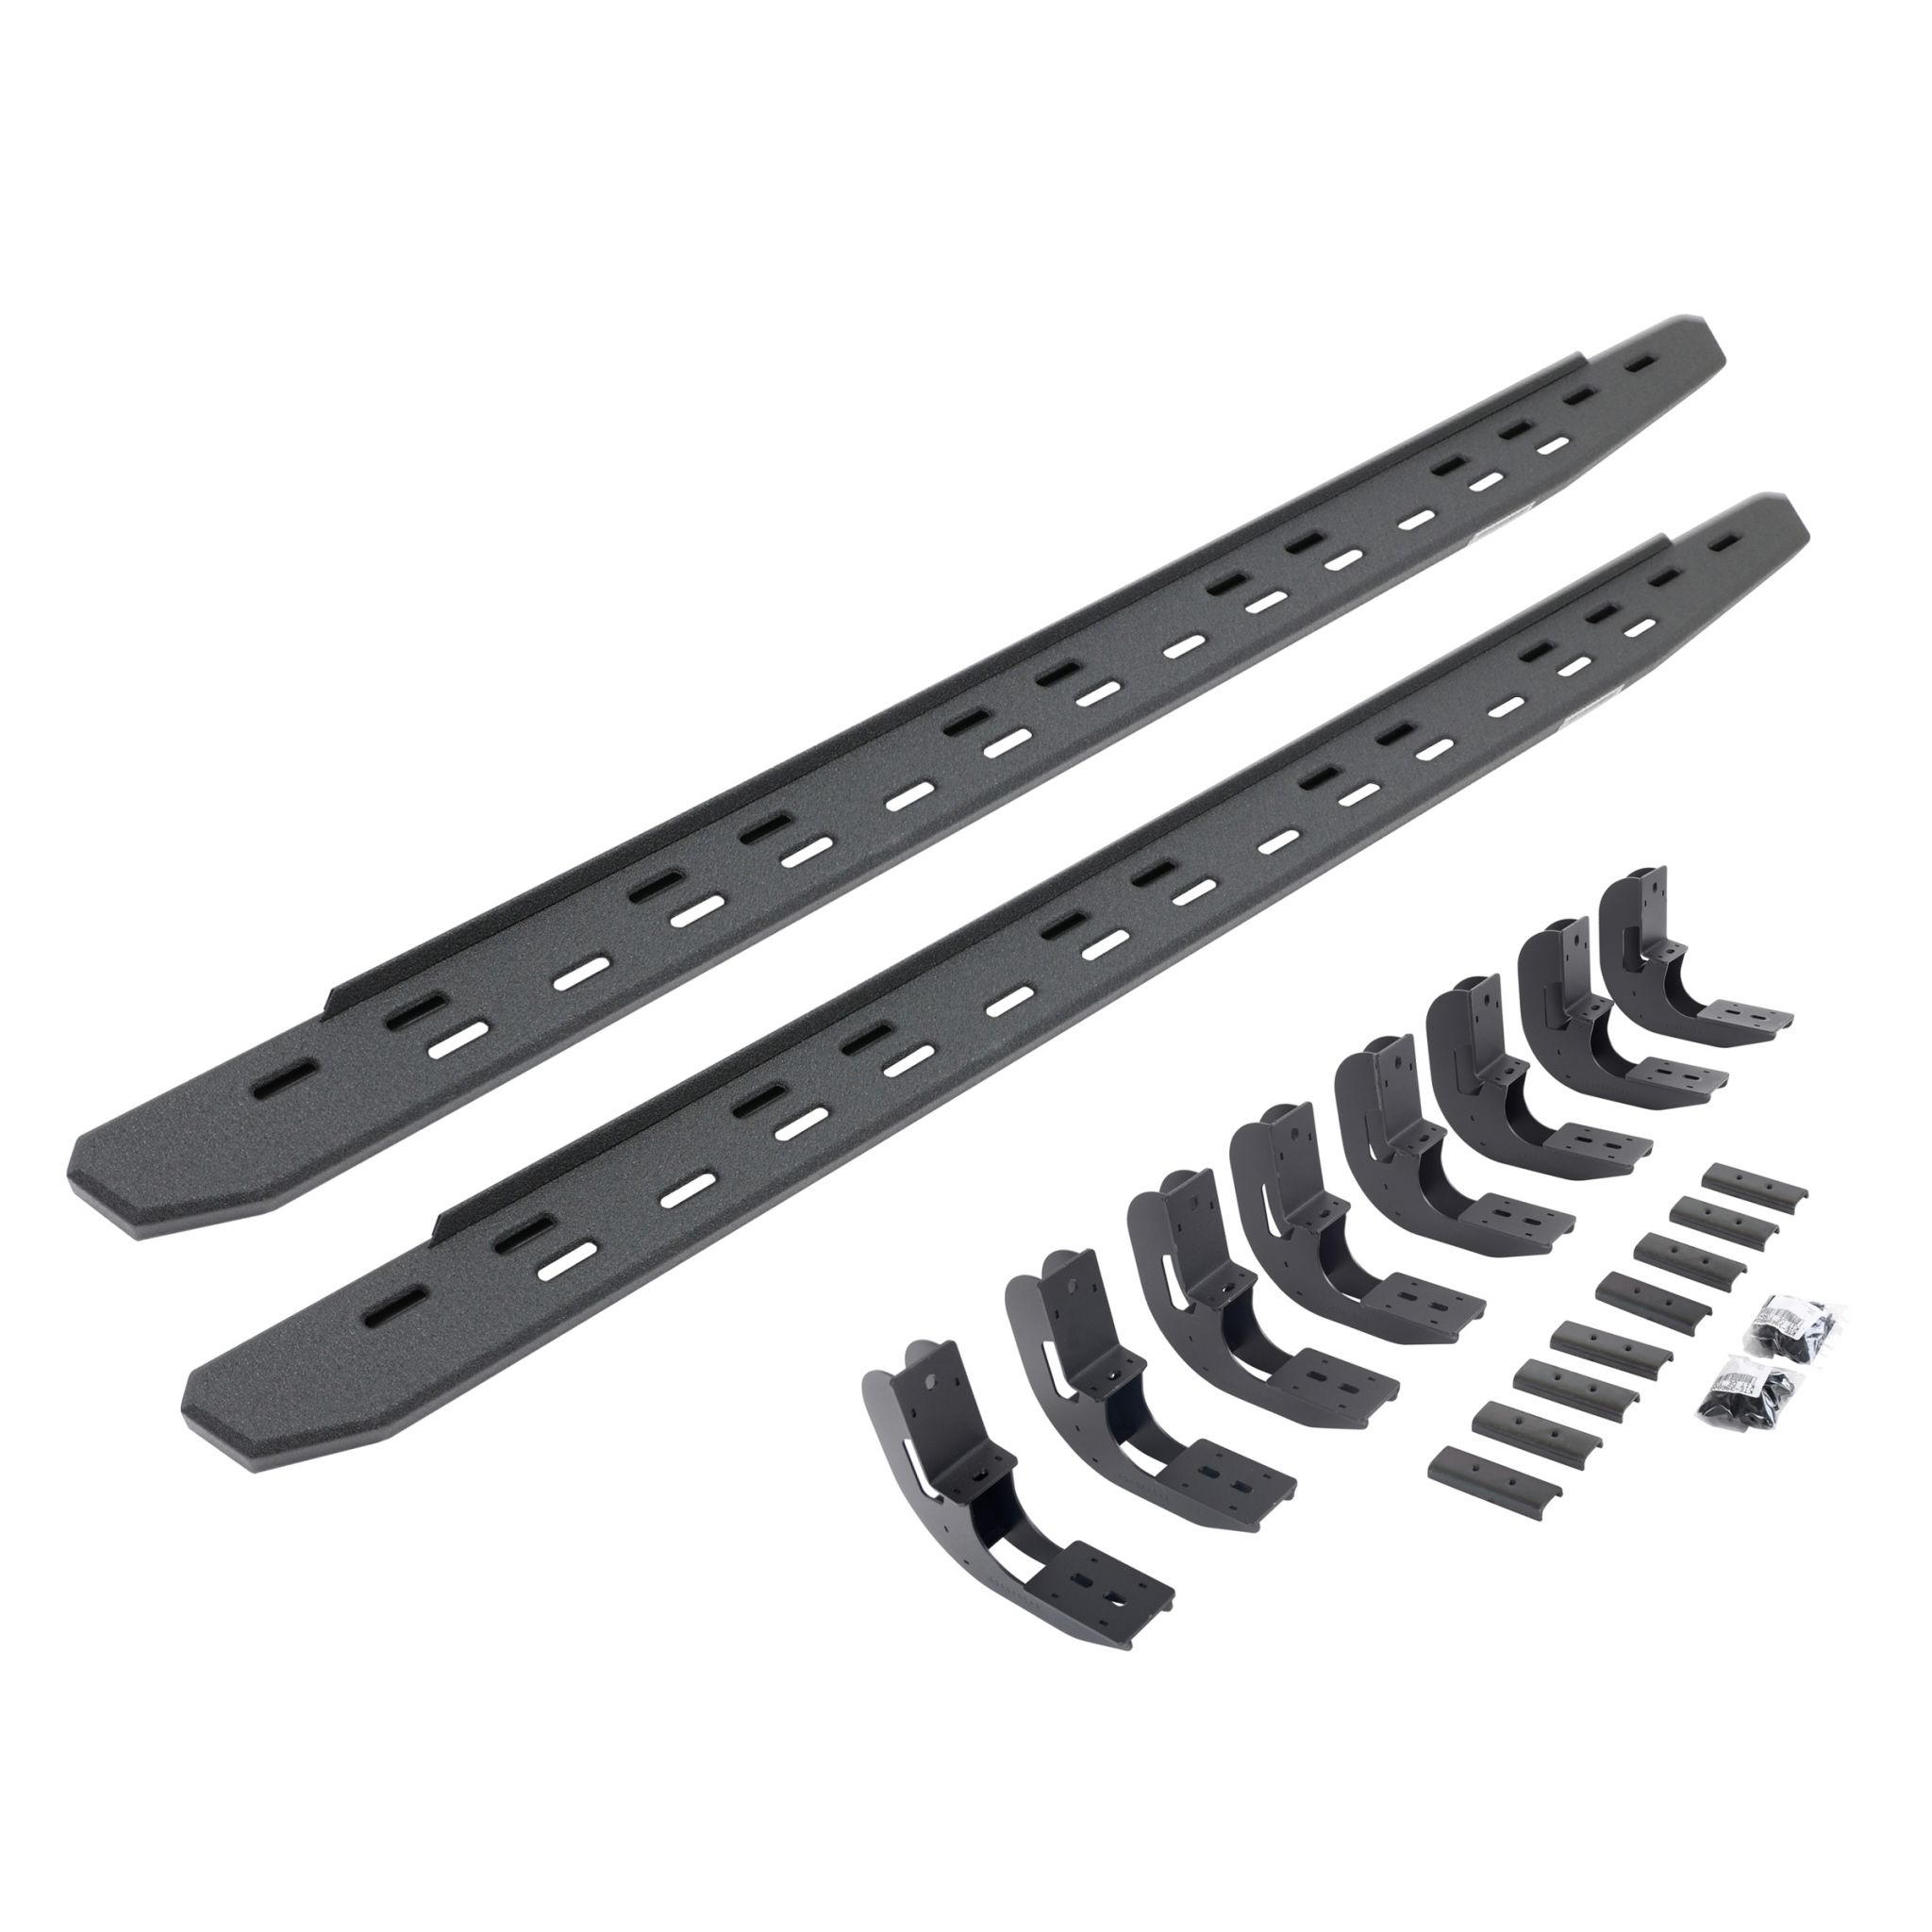 Go Rhino 69604880ST - RB30 Slime Line Running Boards with Mounting Bracket Kit - Protective Bedliner Coating